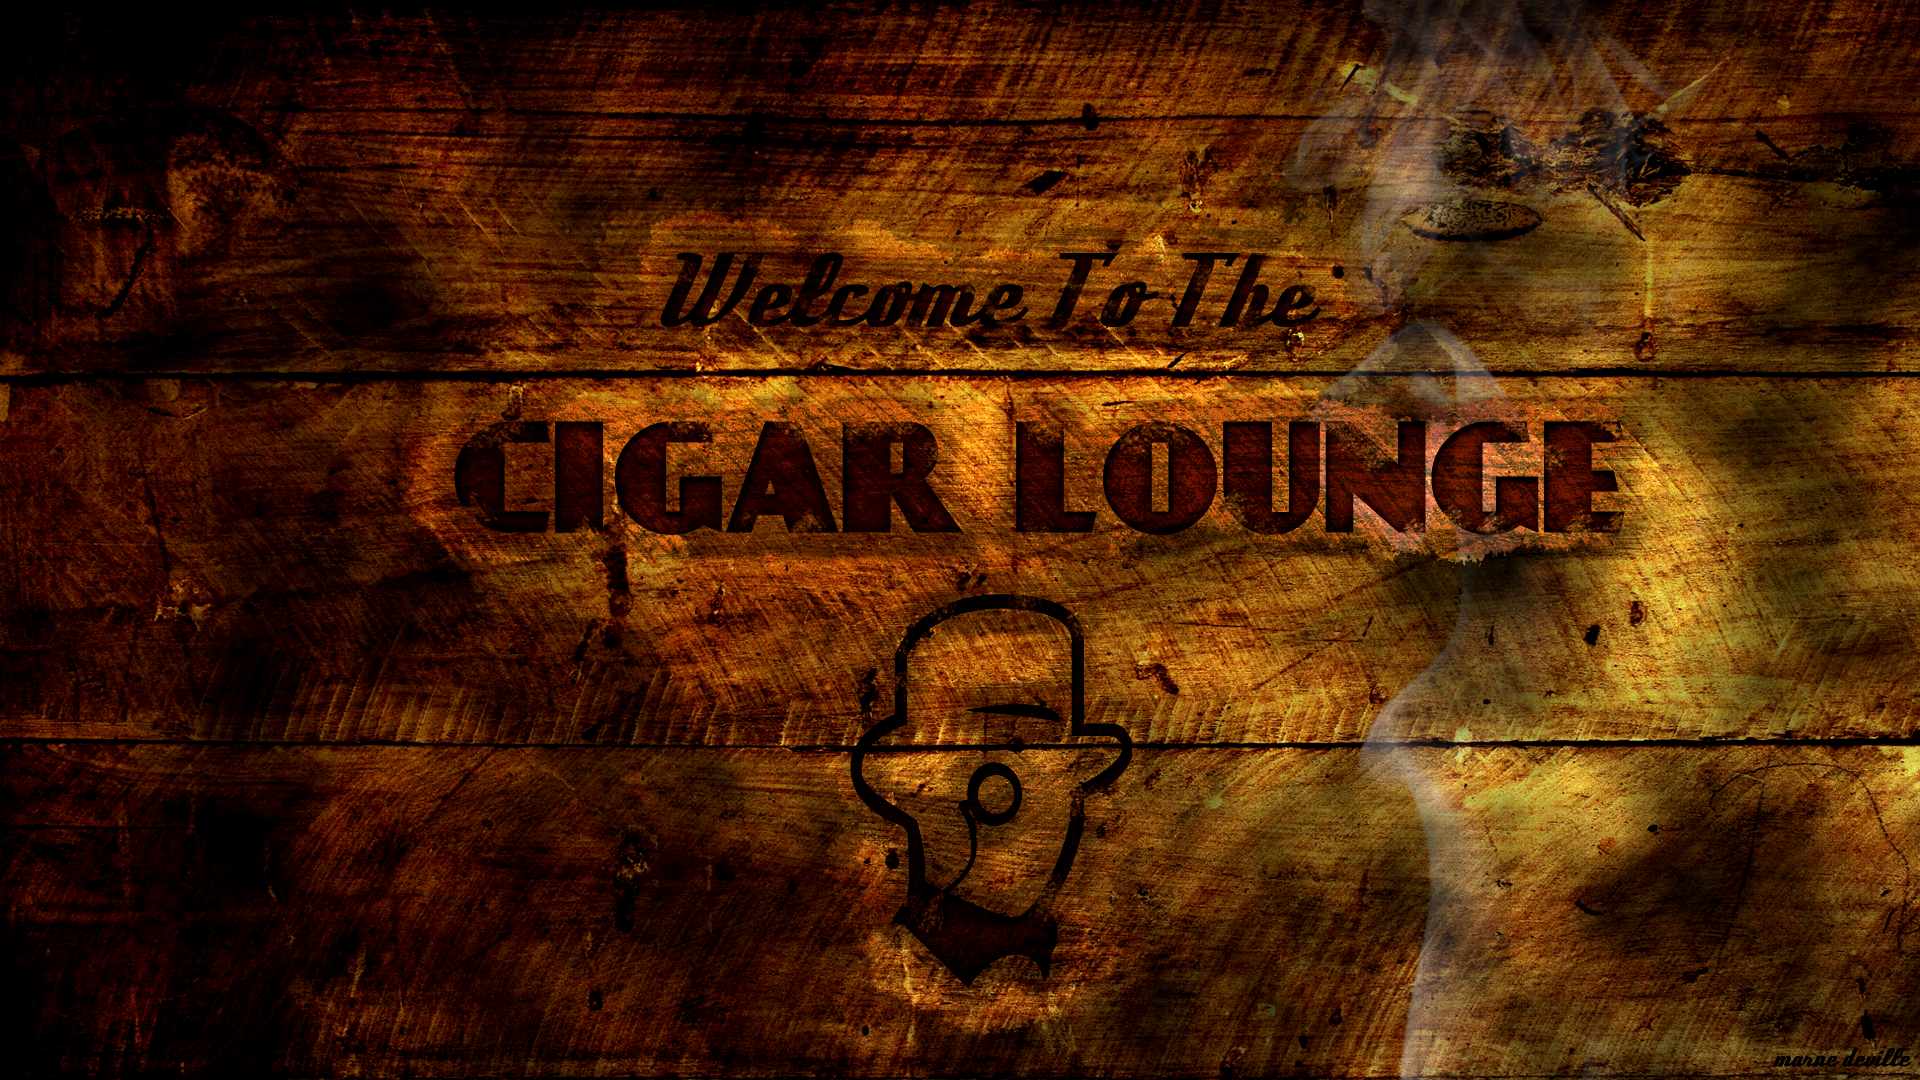 Cigars Wallpaper Pictures 1920x1080